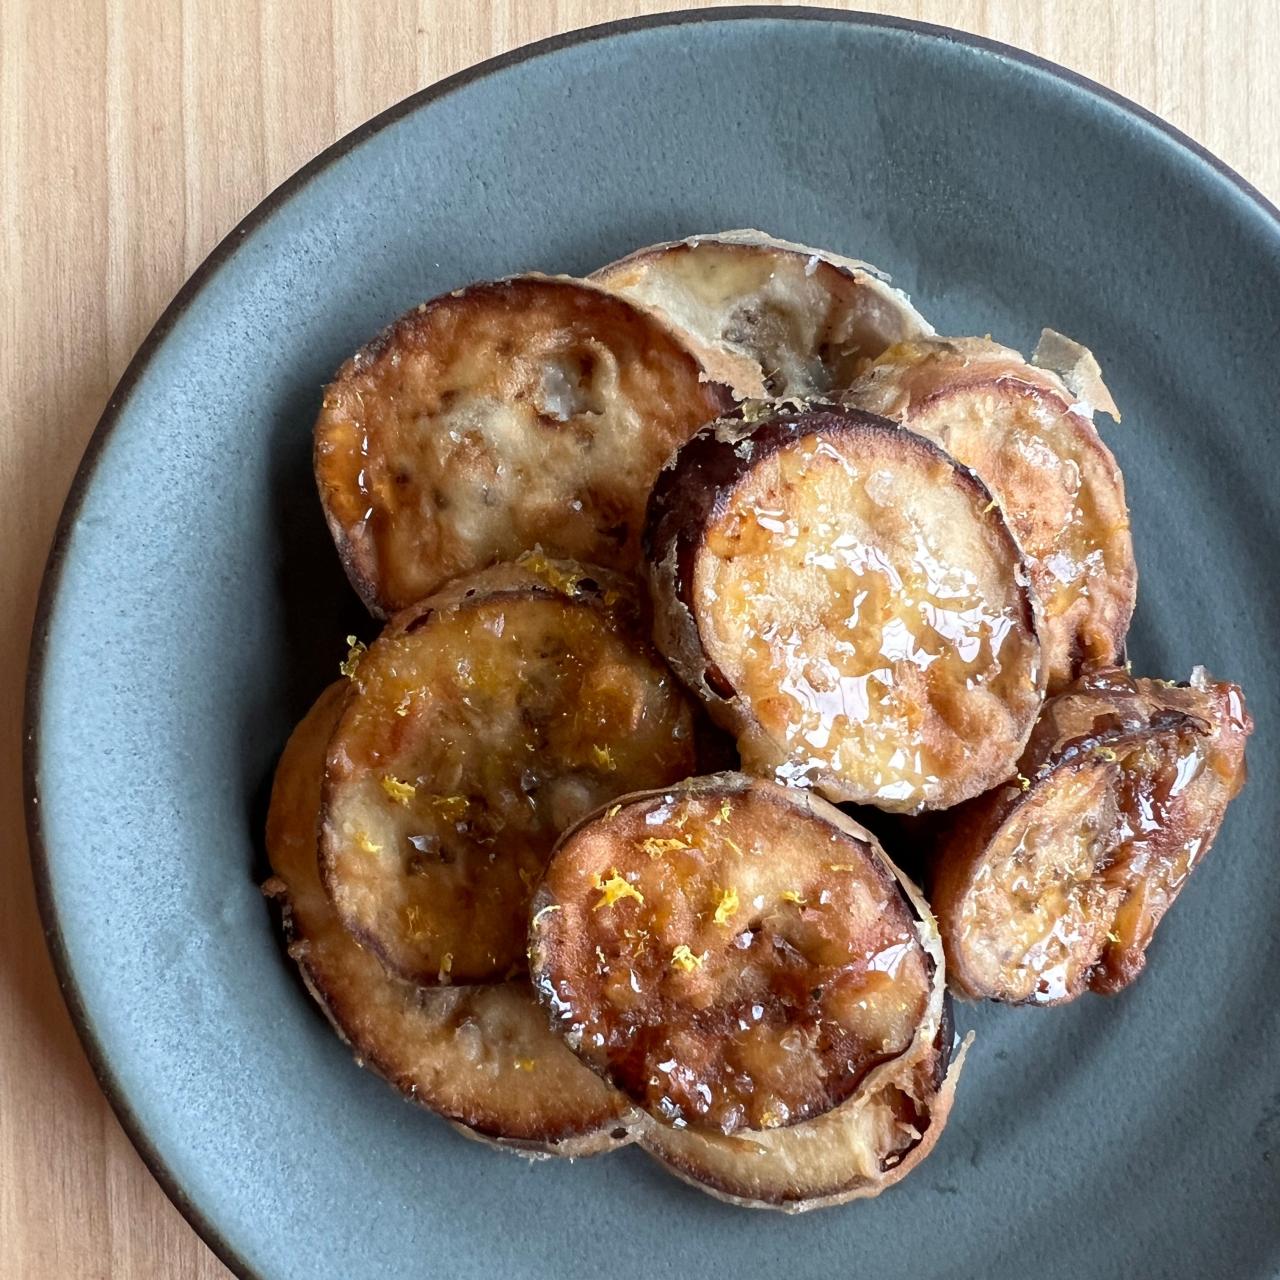 Fried eggplant with honey from Spain's deep south